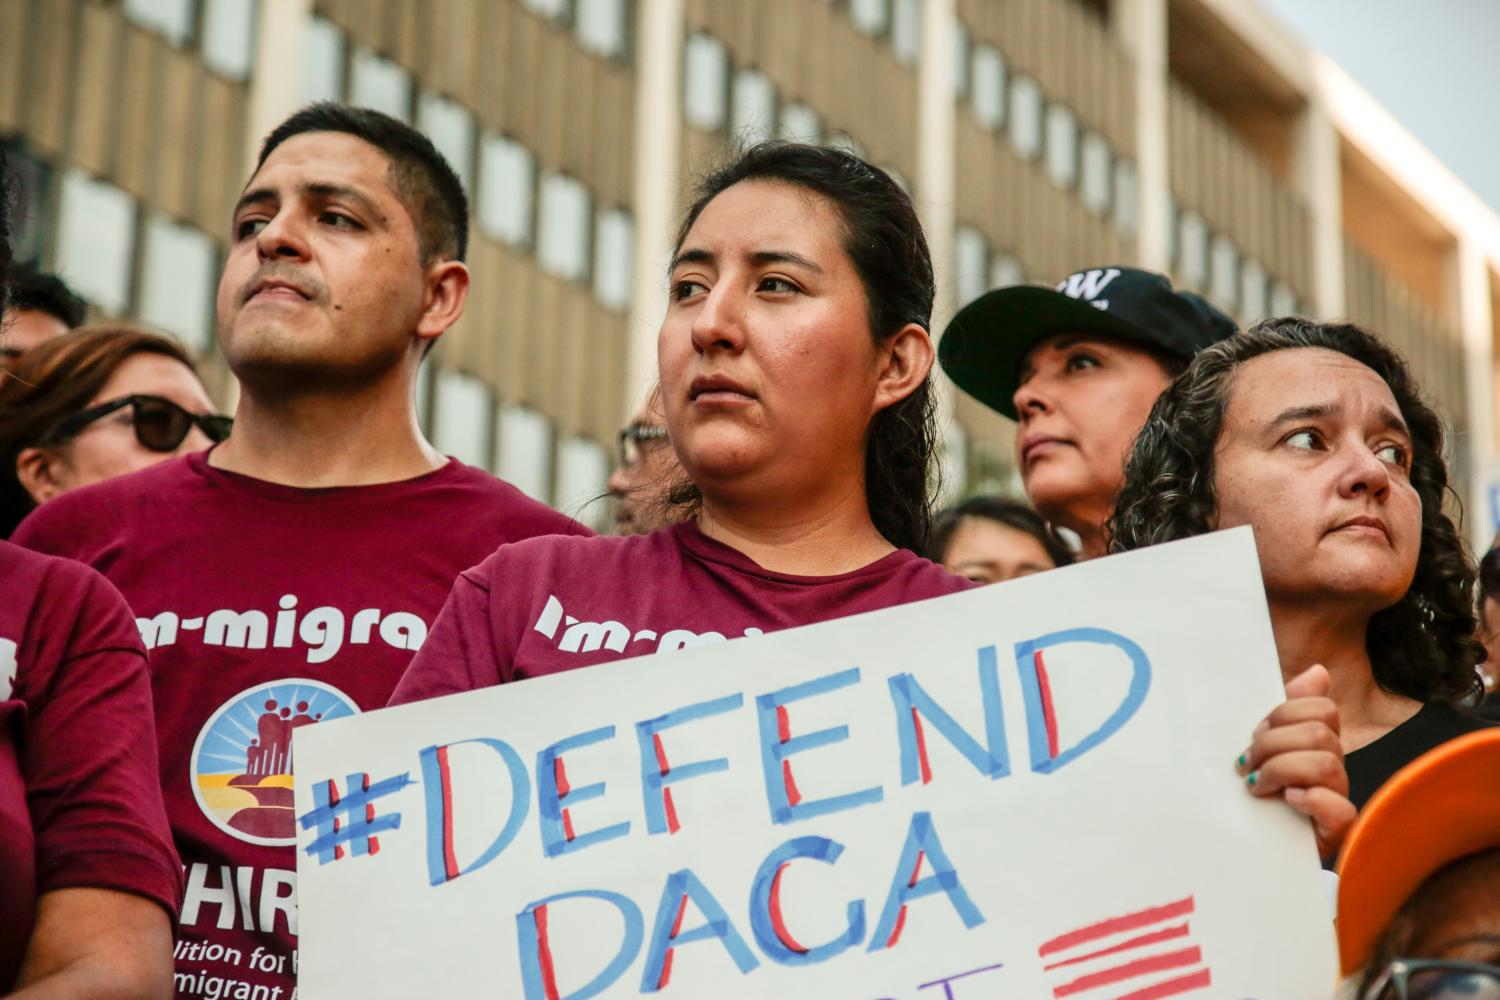 Protesters gather to show support for the Deferred Action for Childhood Arrivals (DACA) program outside the Federal Building in Los Angeles, California, U.S., September 1, 2017. REUTERS/Kyle Grillot - RC1B156F7DA0